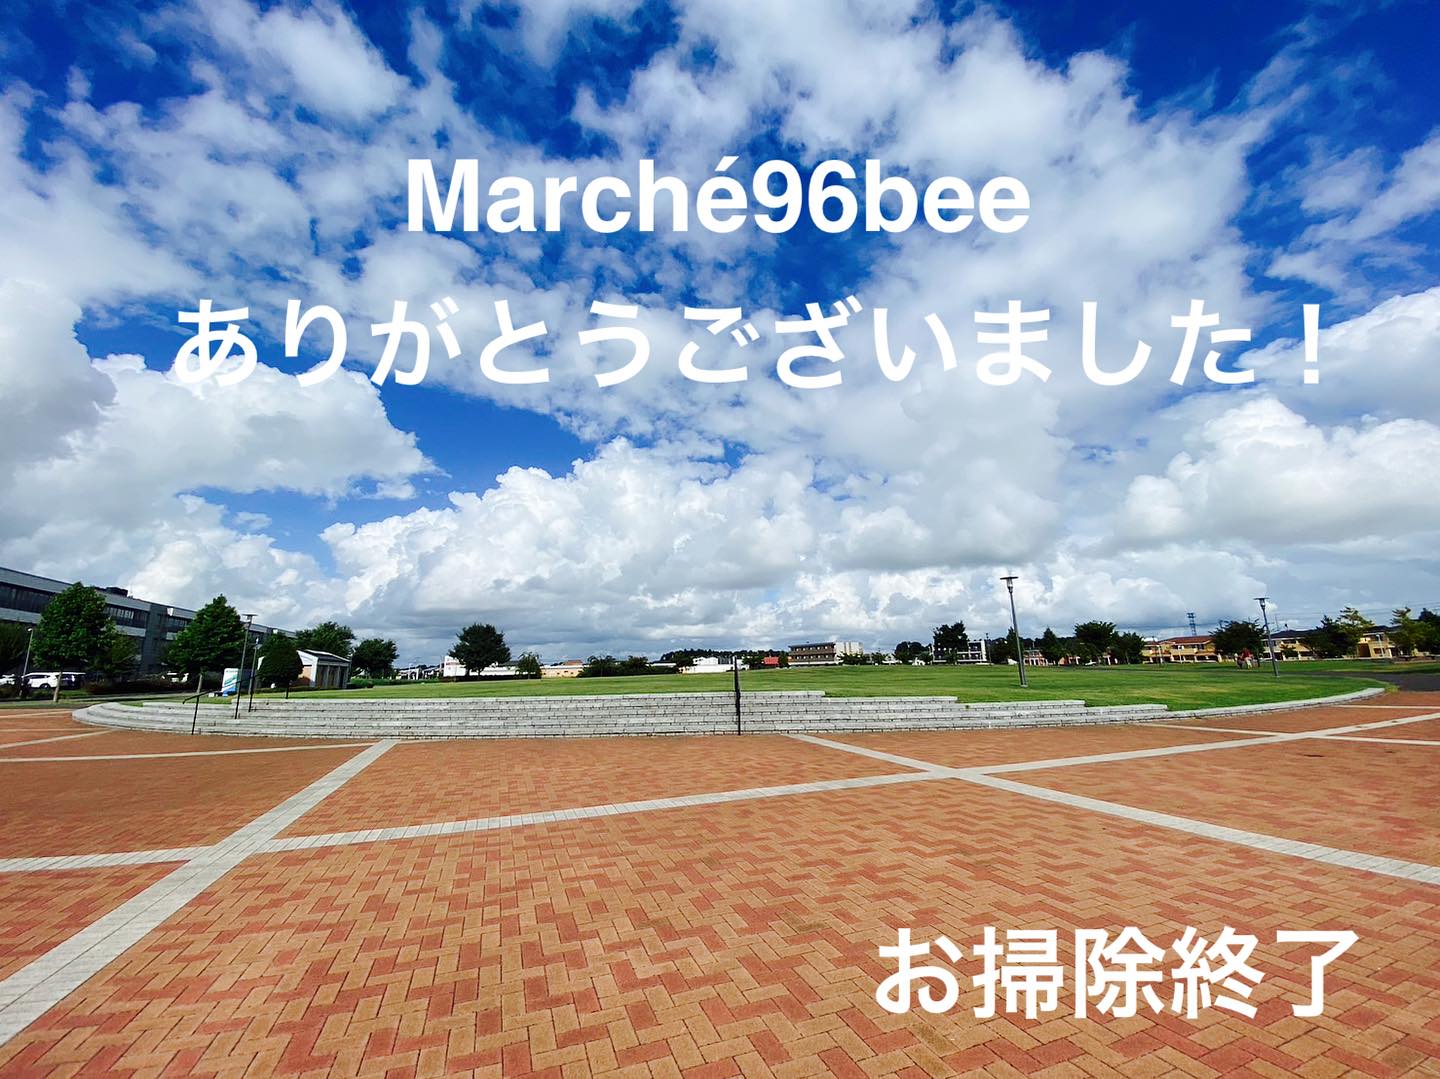 8/26「Marché 96bee」ありがとうございました!page-visual 8/26「Marché 96bee」ありがとうございました!ビジュアル